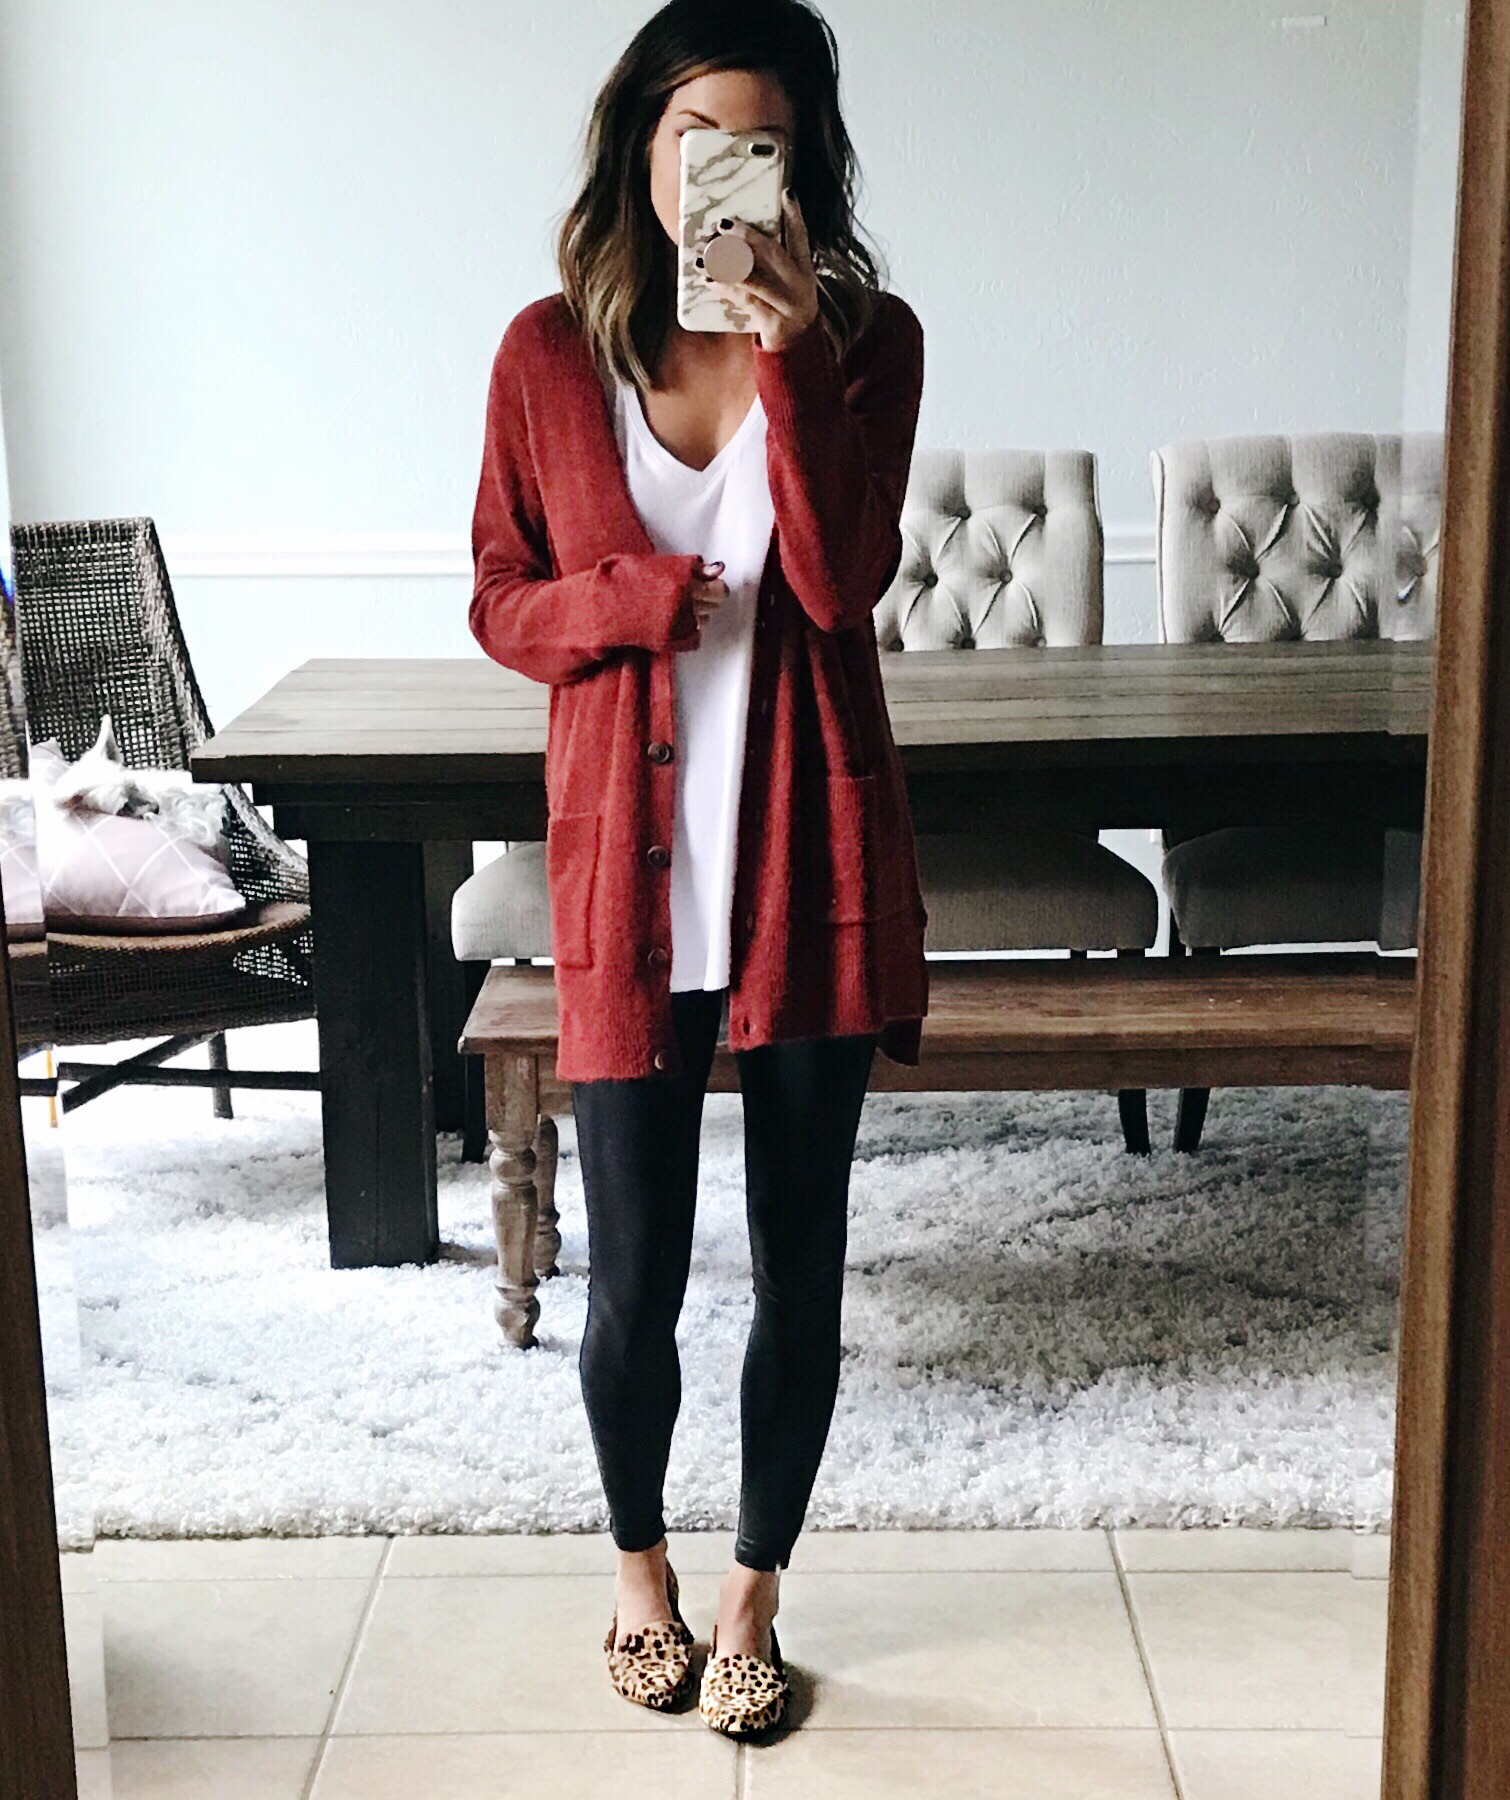 long red sweater to wear with leggings